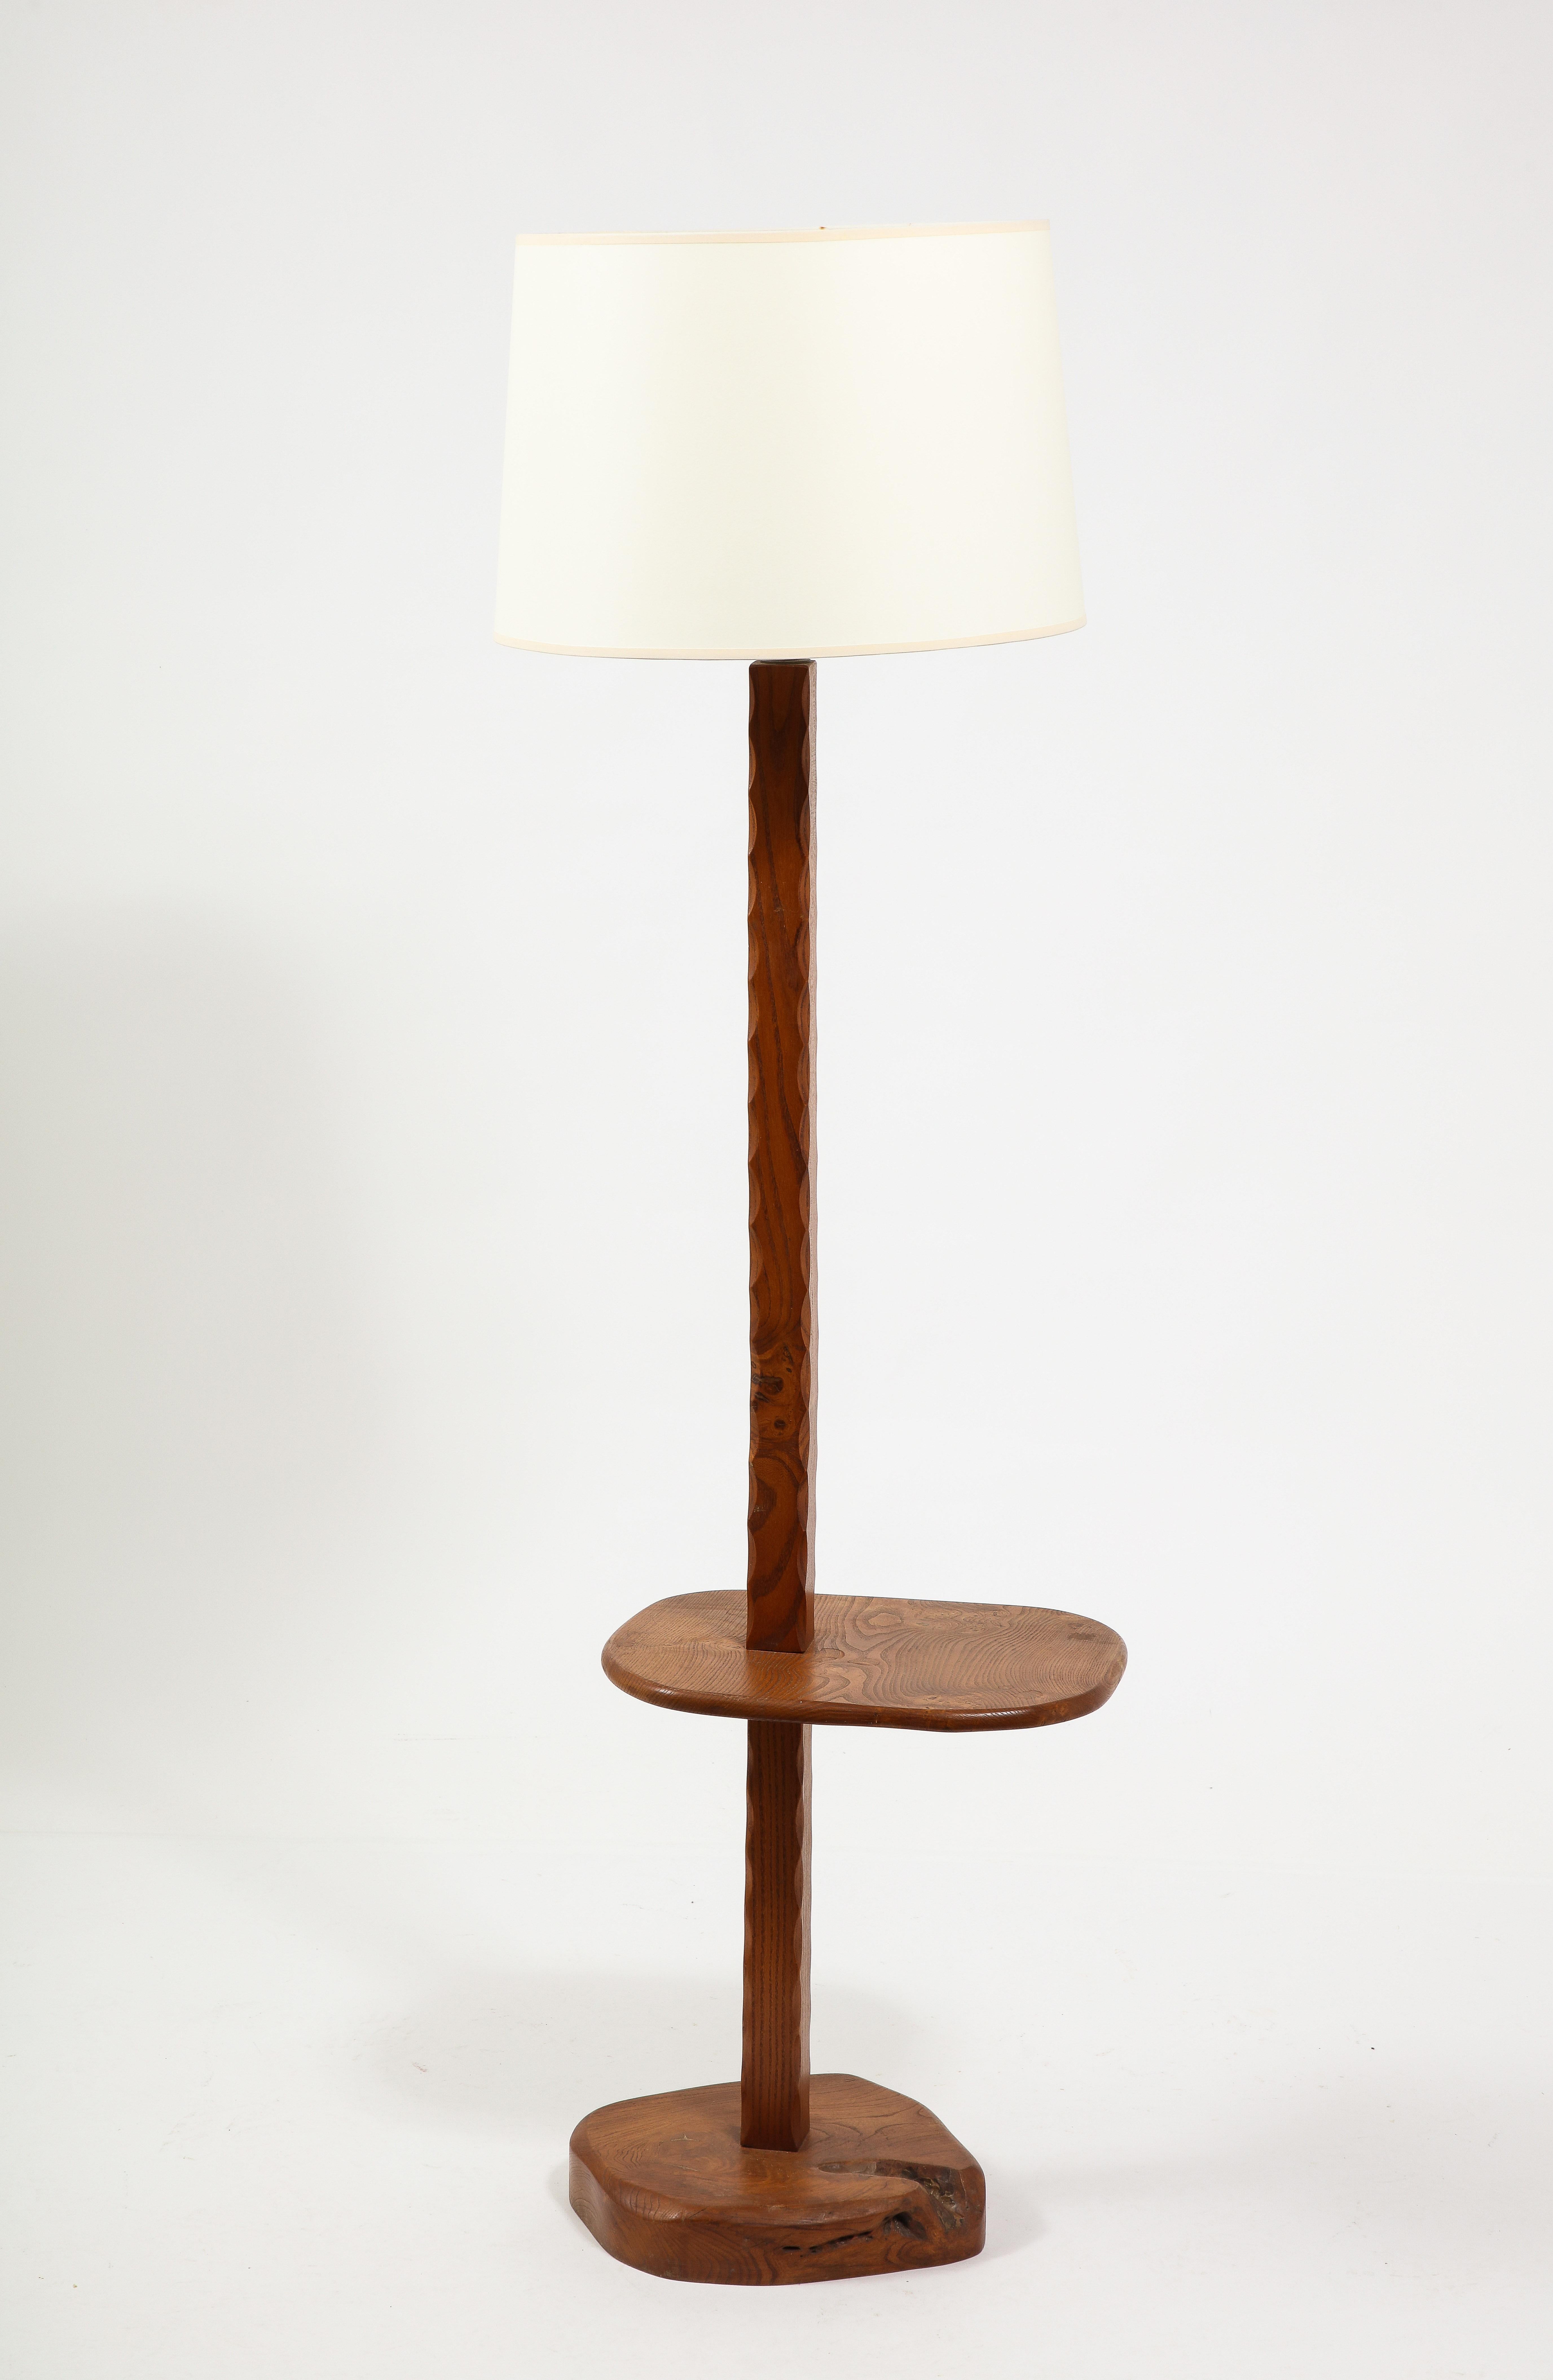 20th Century Solid Elm Floor Lamp With Shelf, France 1950's For Sale